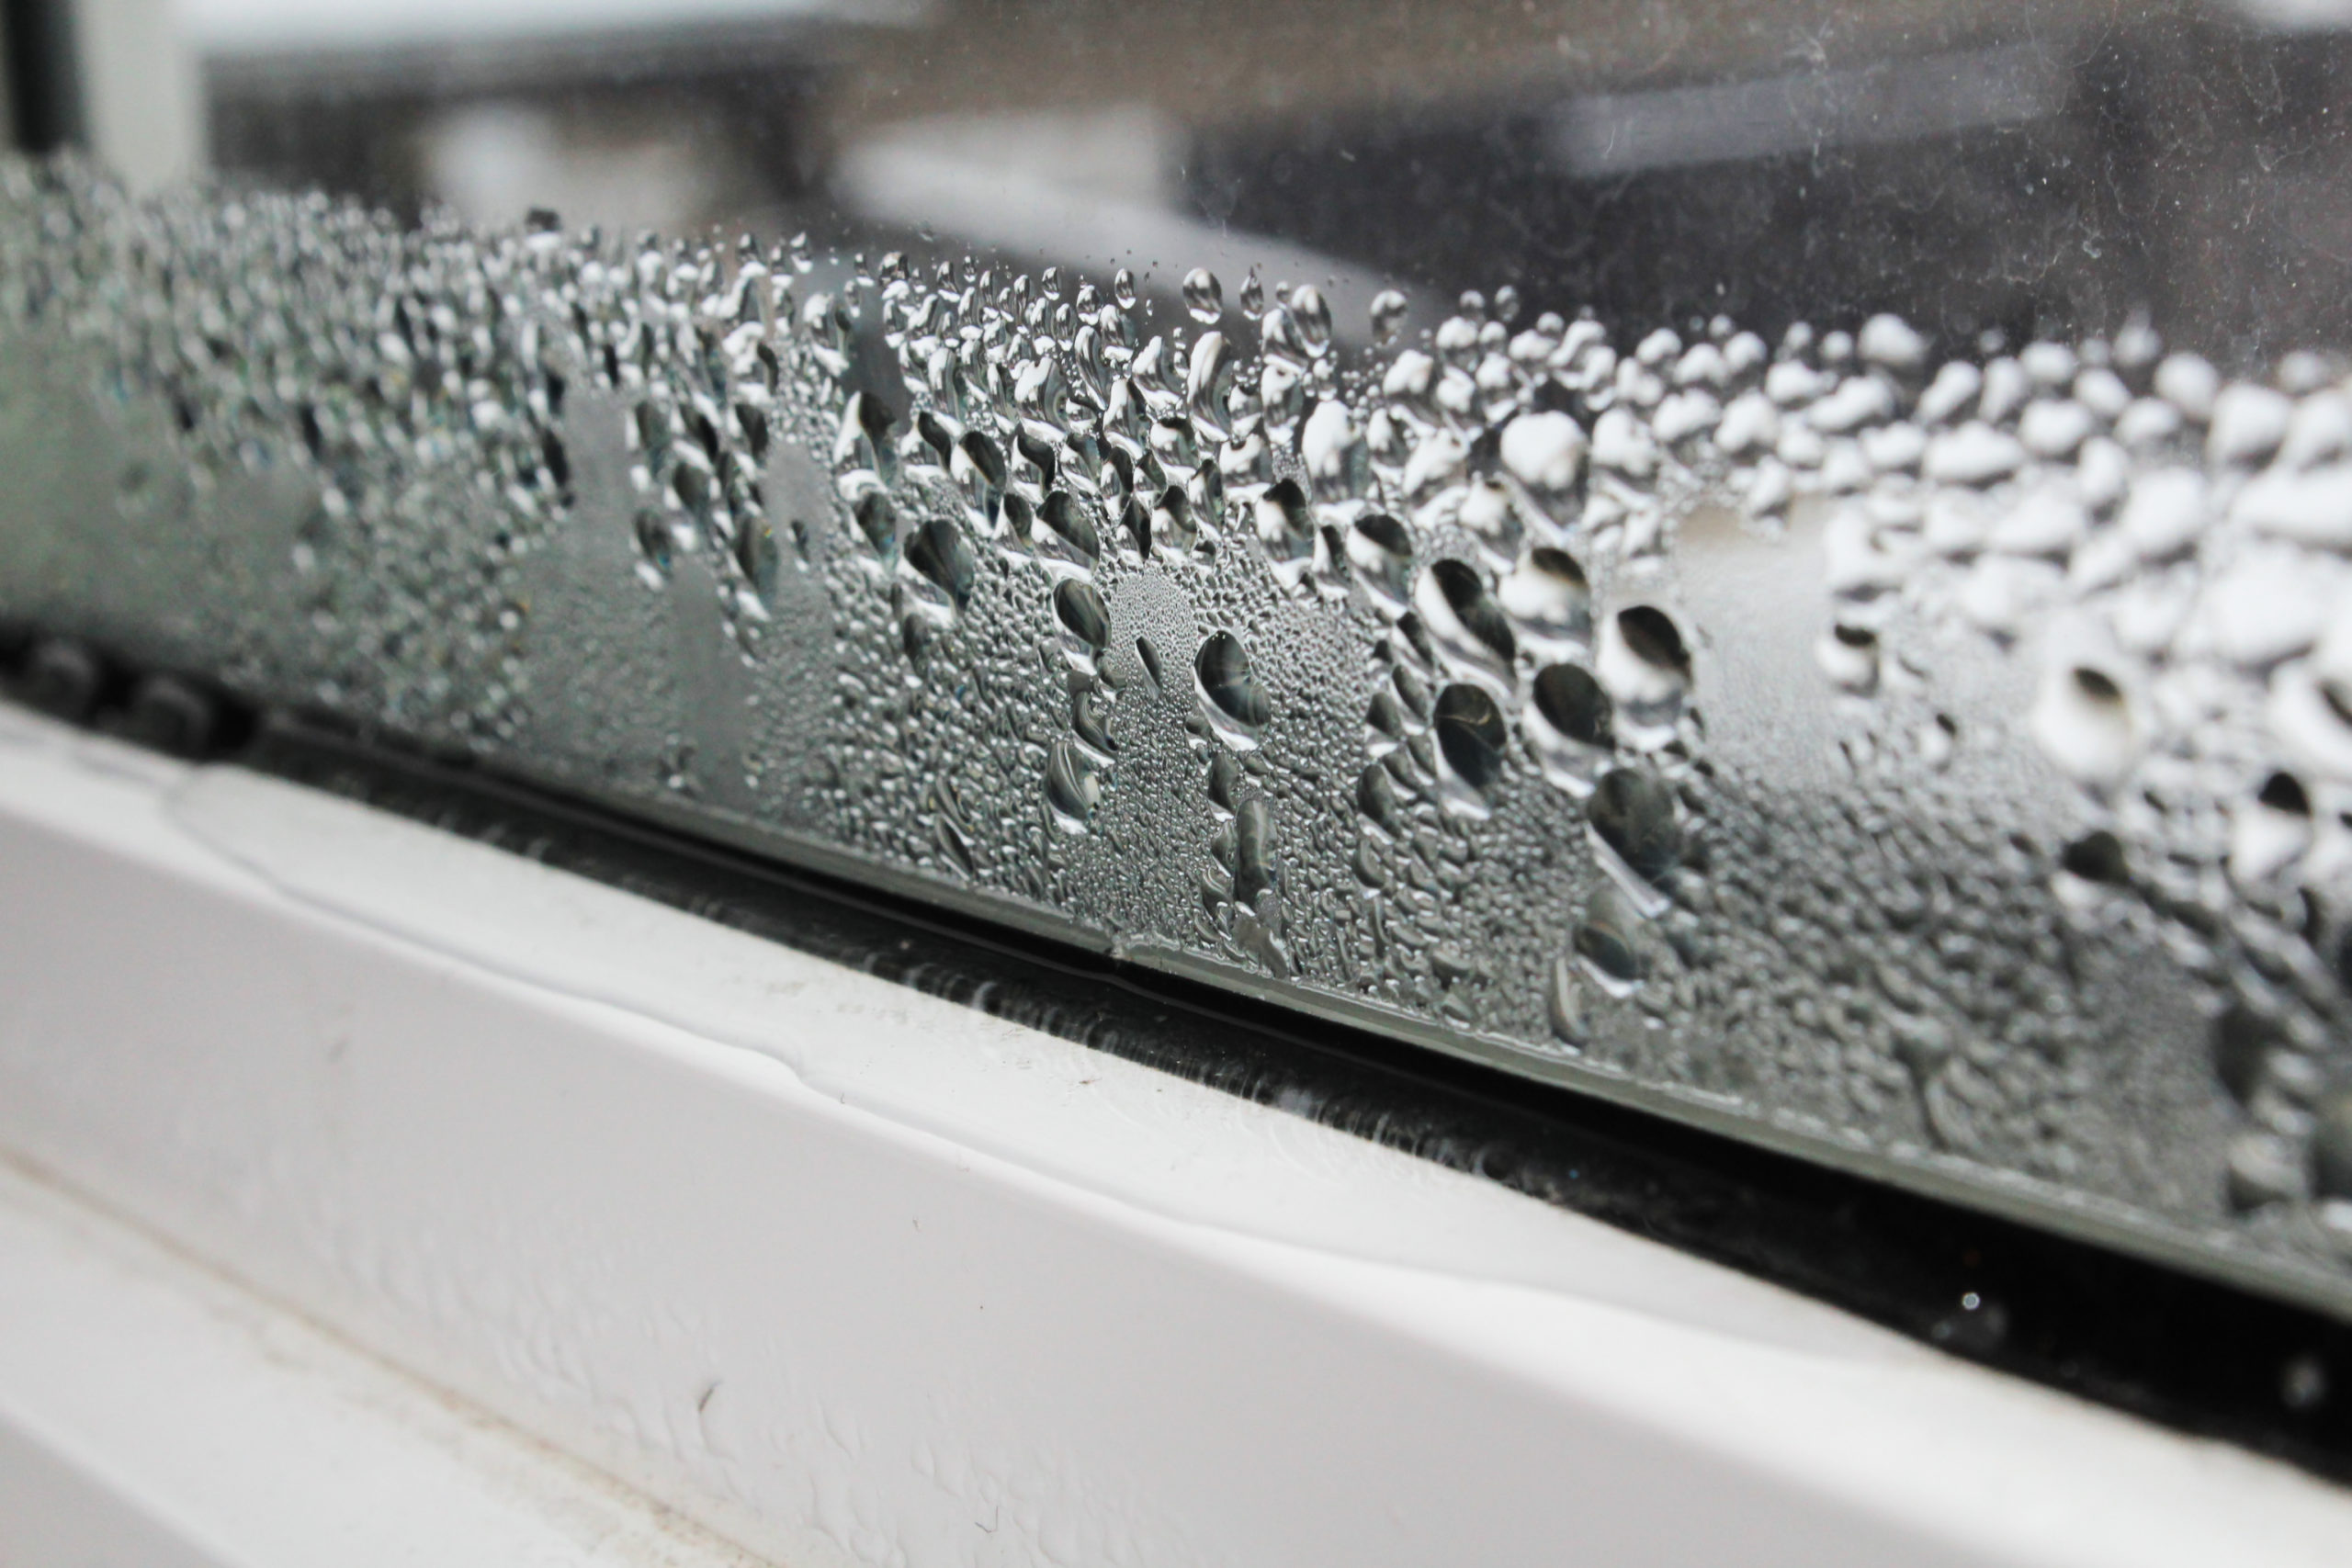 How To Prevent Ice Build Up on Windows Before It Causes Severe Damage